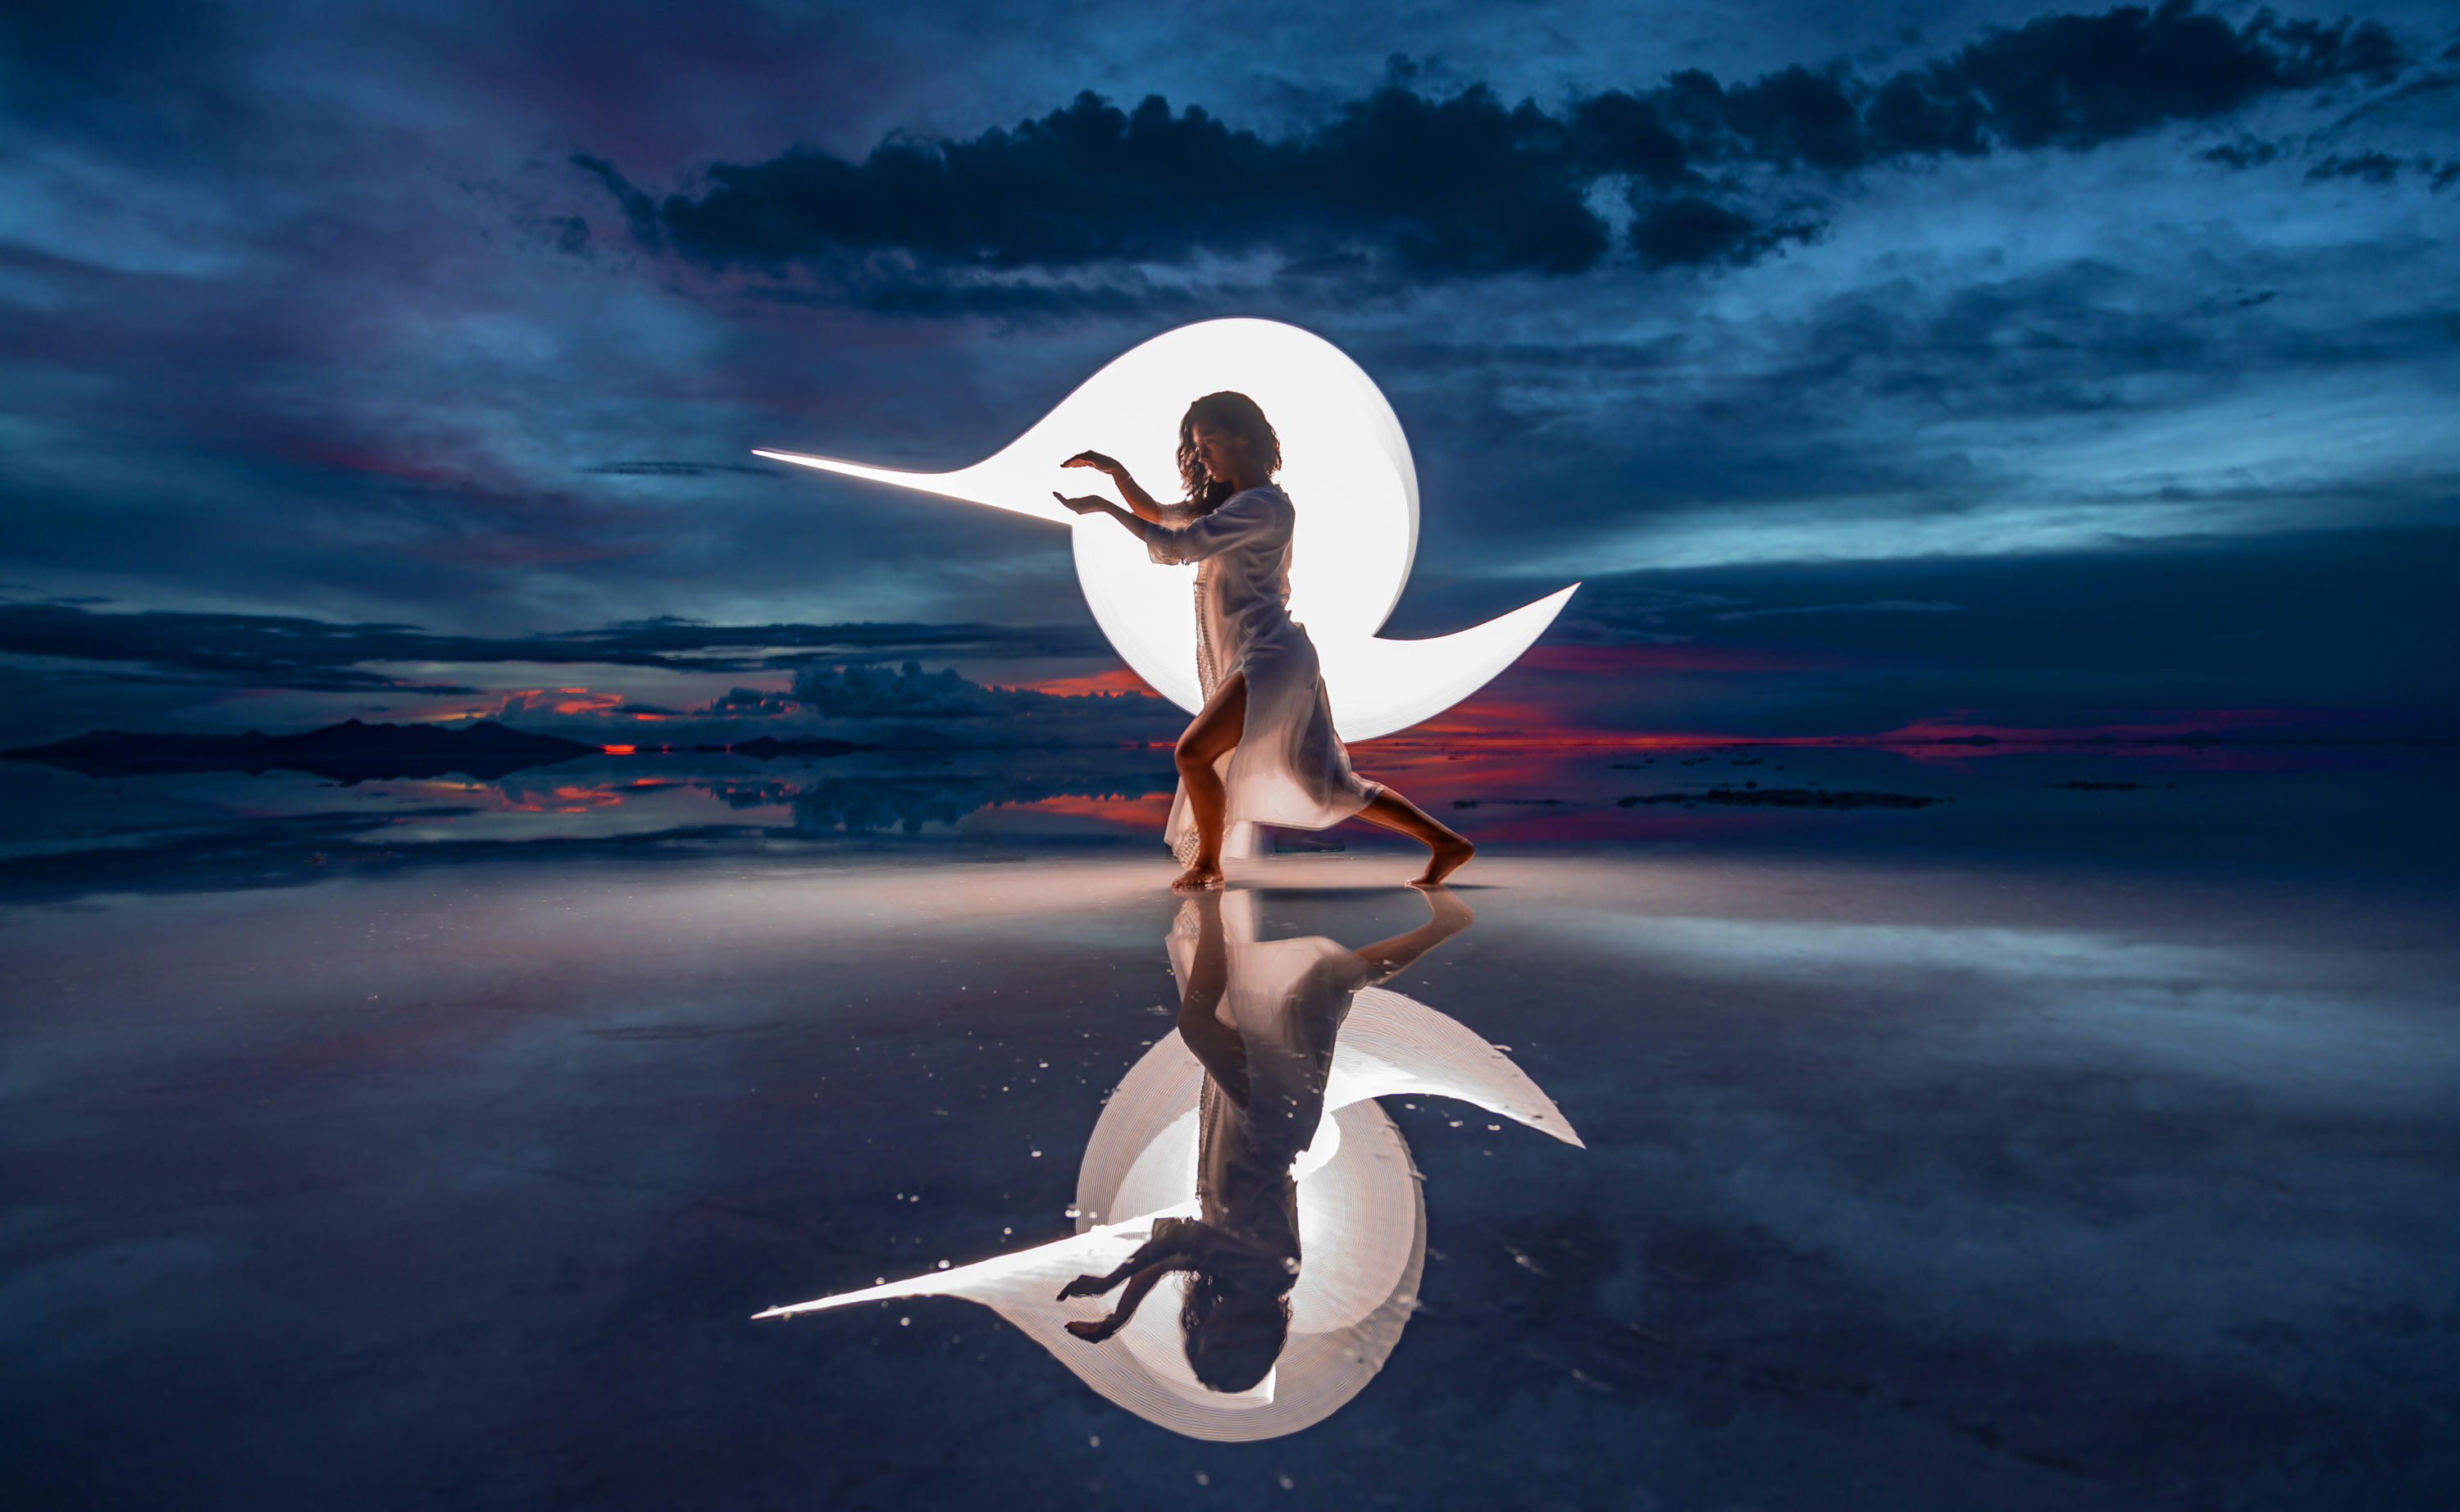 Use Reflection in your Light Painting Photography by Gunnar Heilmann